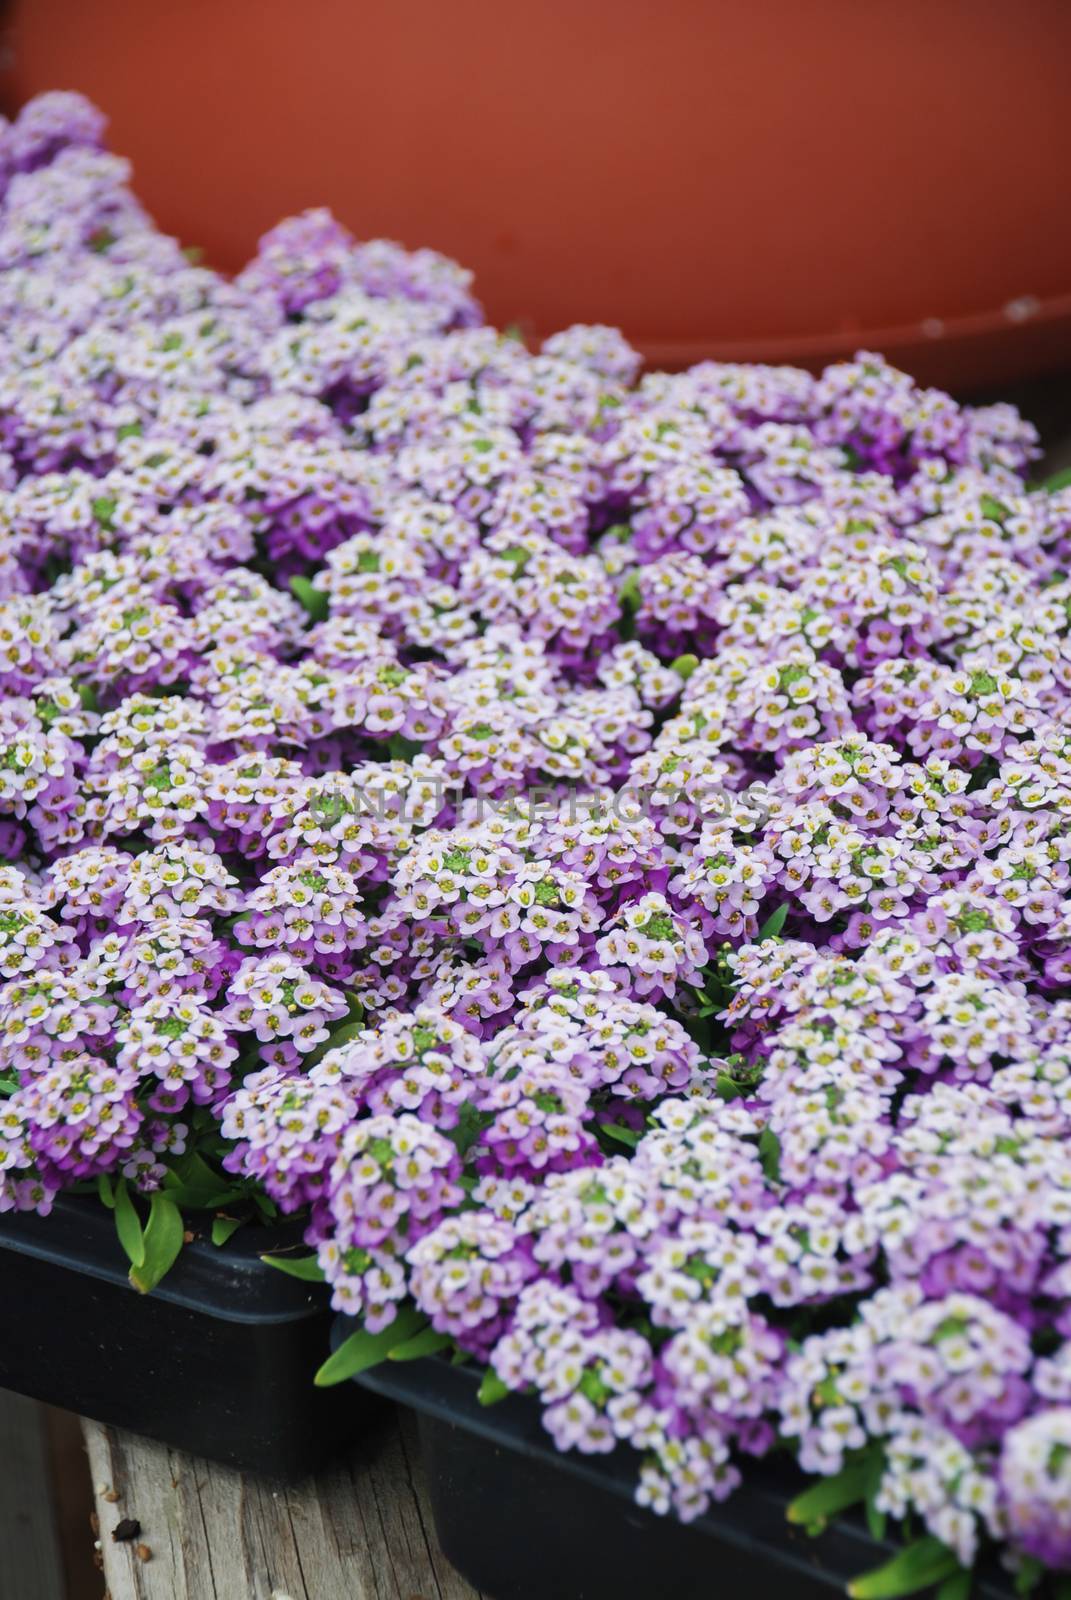 Alyssum flowers. Alyssum in sweet colors. Alyssum in a black tray on wood table, in a dense grounding in a greenhouse.